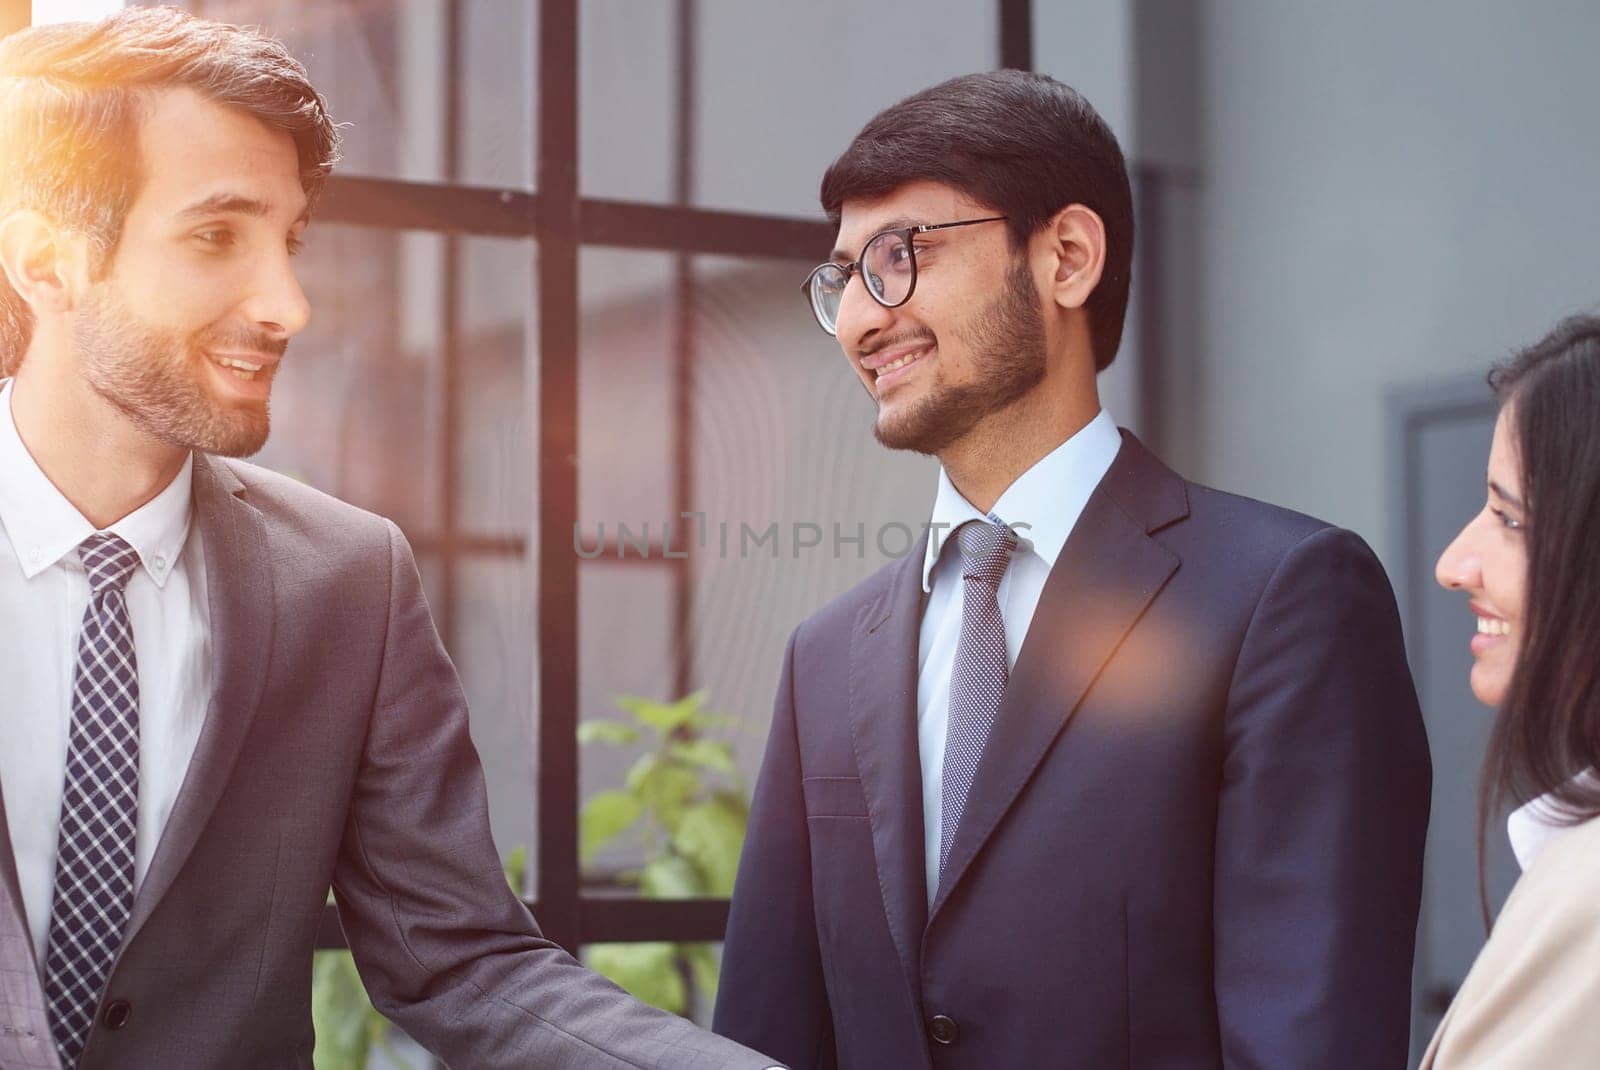 Man shaking hands with woman finishing meeting or signing contract or greeting new employee.